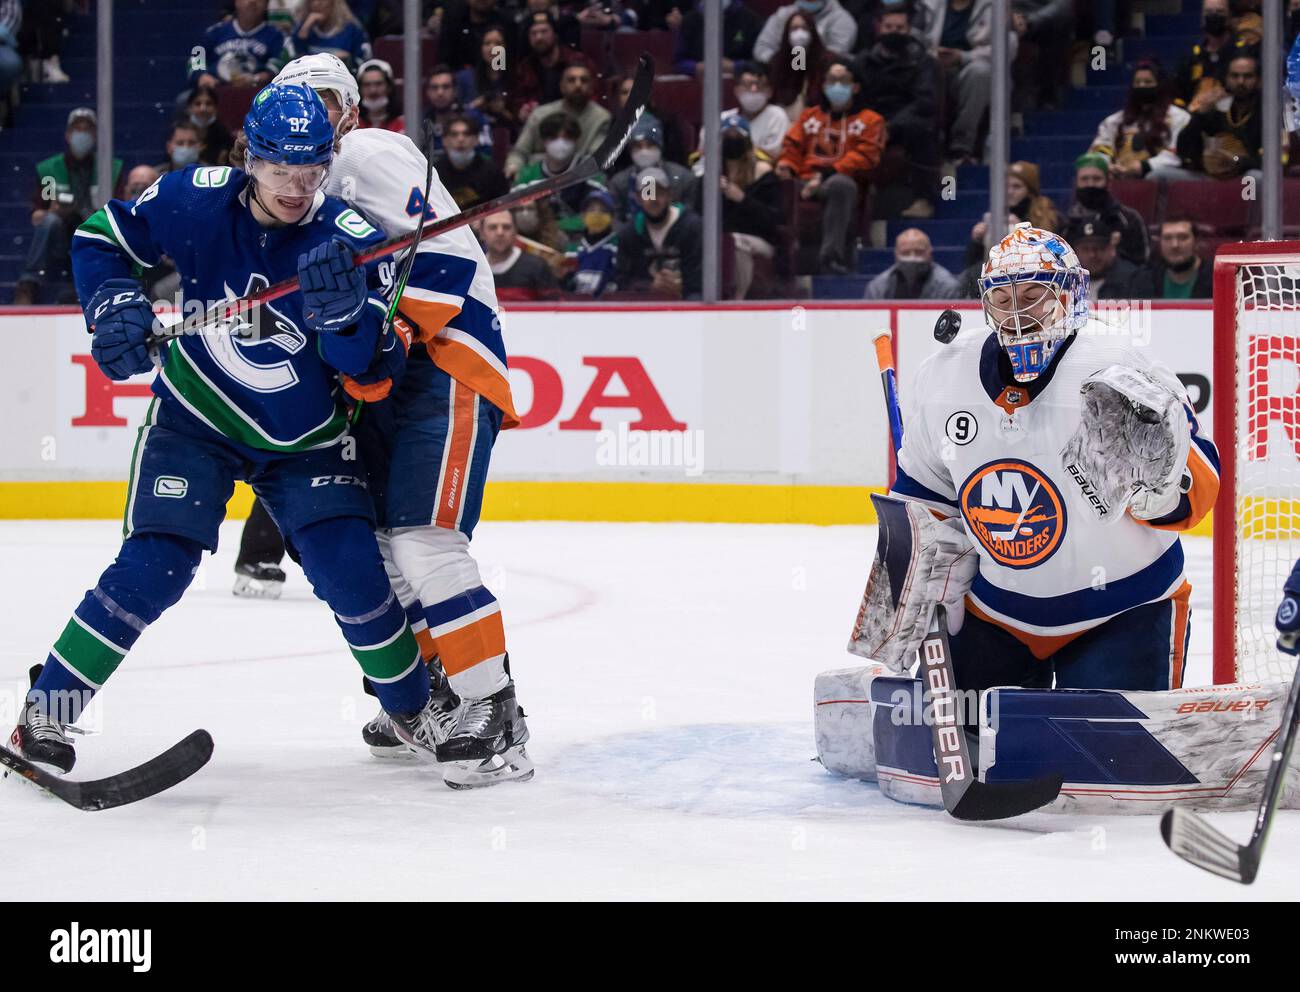 A shot deflects off the mask of Vancouver Canucks goalie Jacob Markstrom,  right, of Sweden, as Calgary Flames' Troy Brouwer tries to get his stick on  the puck during the second period of an NHL hockey game in Vancouver,  British Columbia, Saturday, Oct